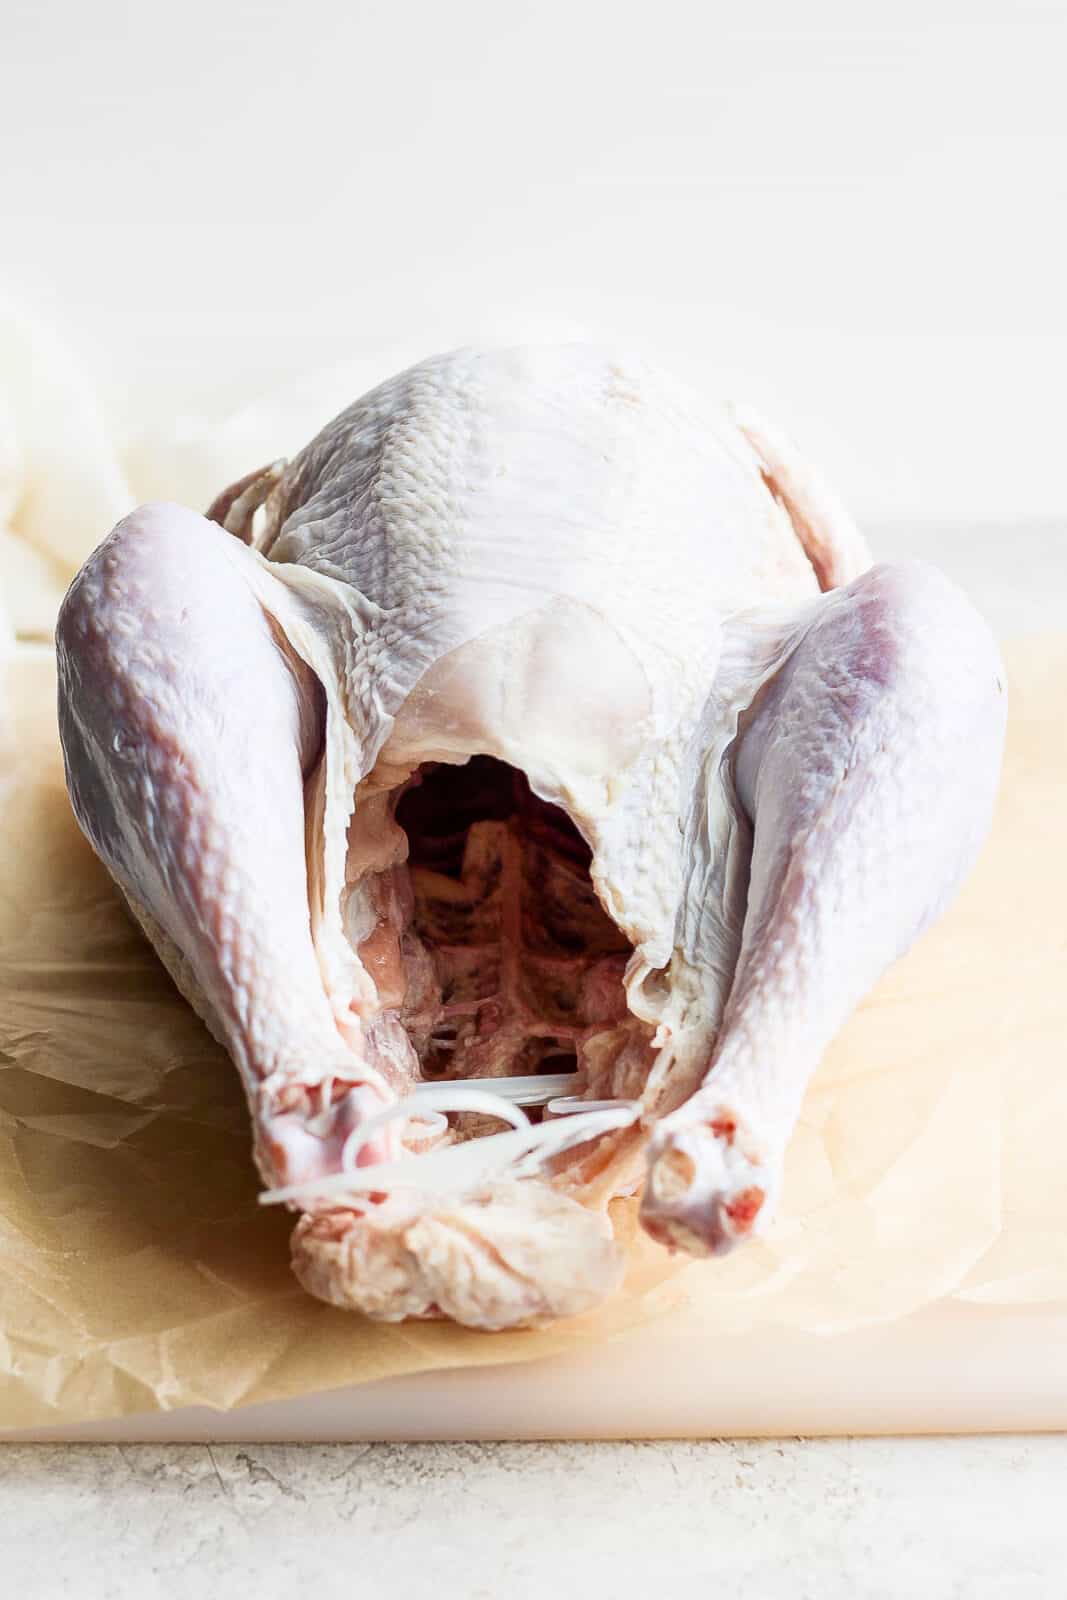 A whole turkey that has been thawed.